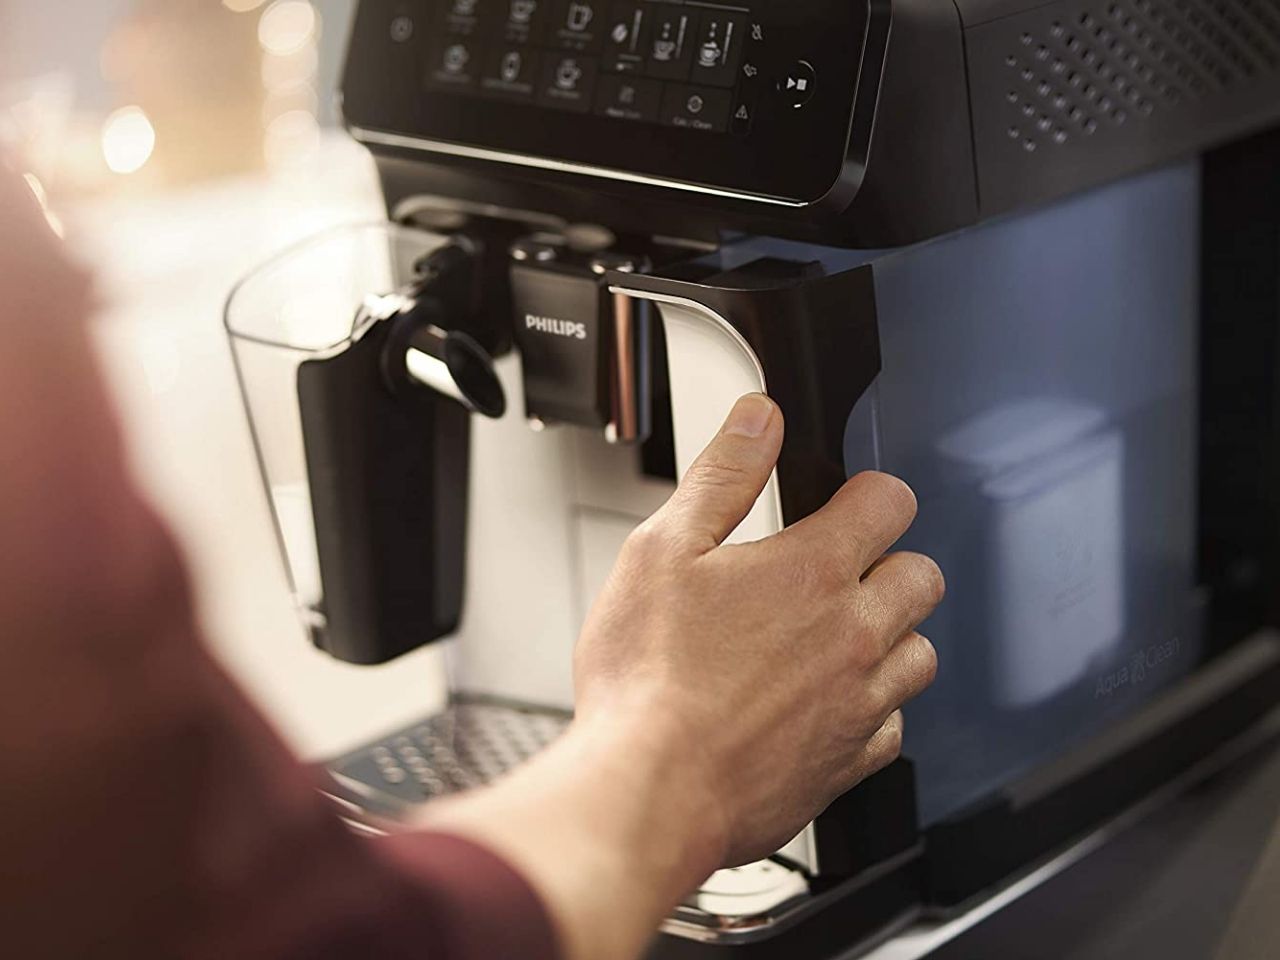 A person touches the front of the Philips 3200 EP3241 espresso machine.